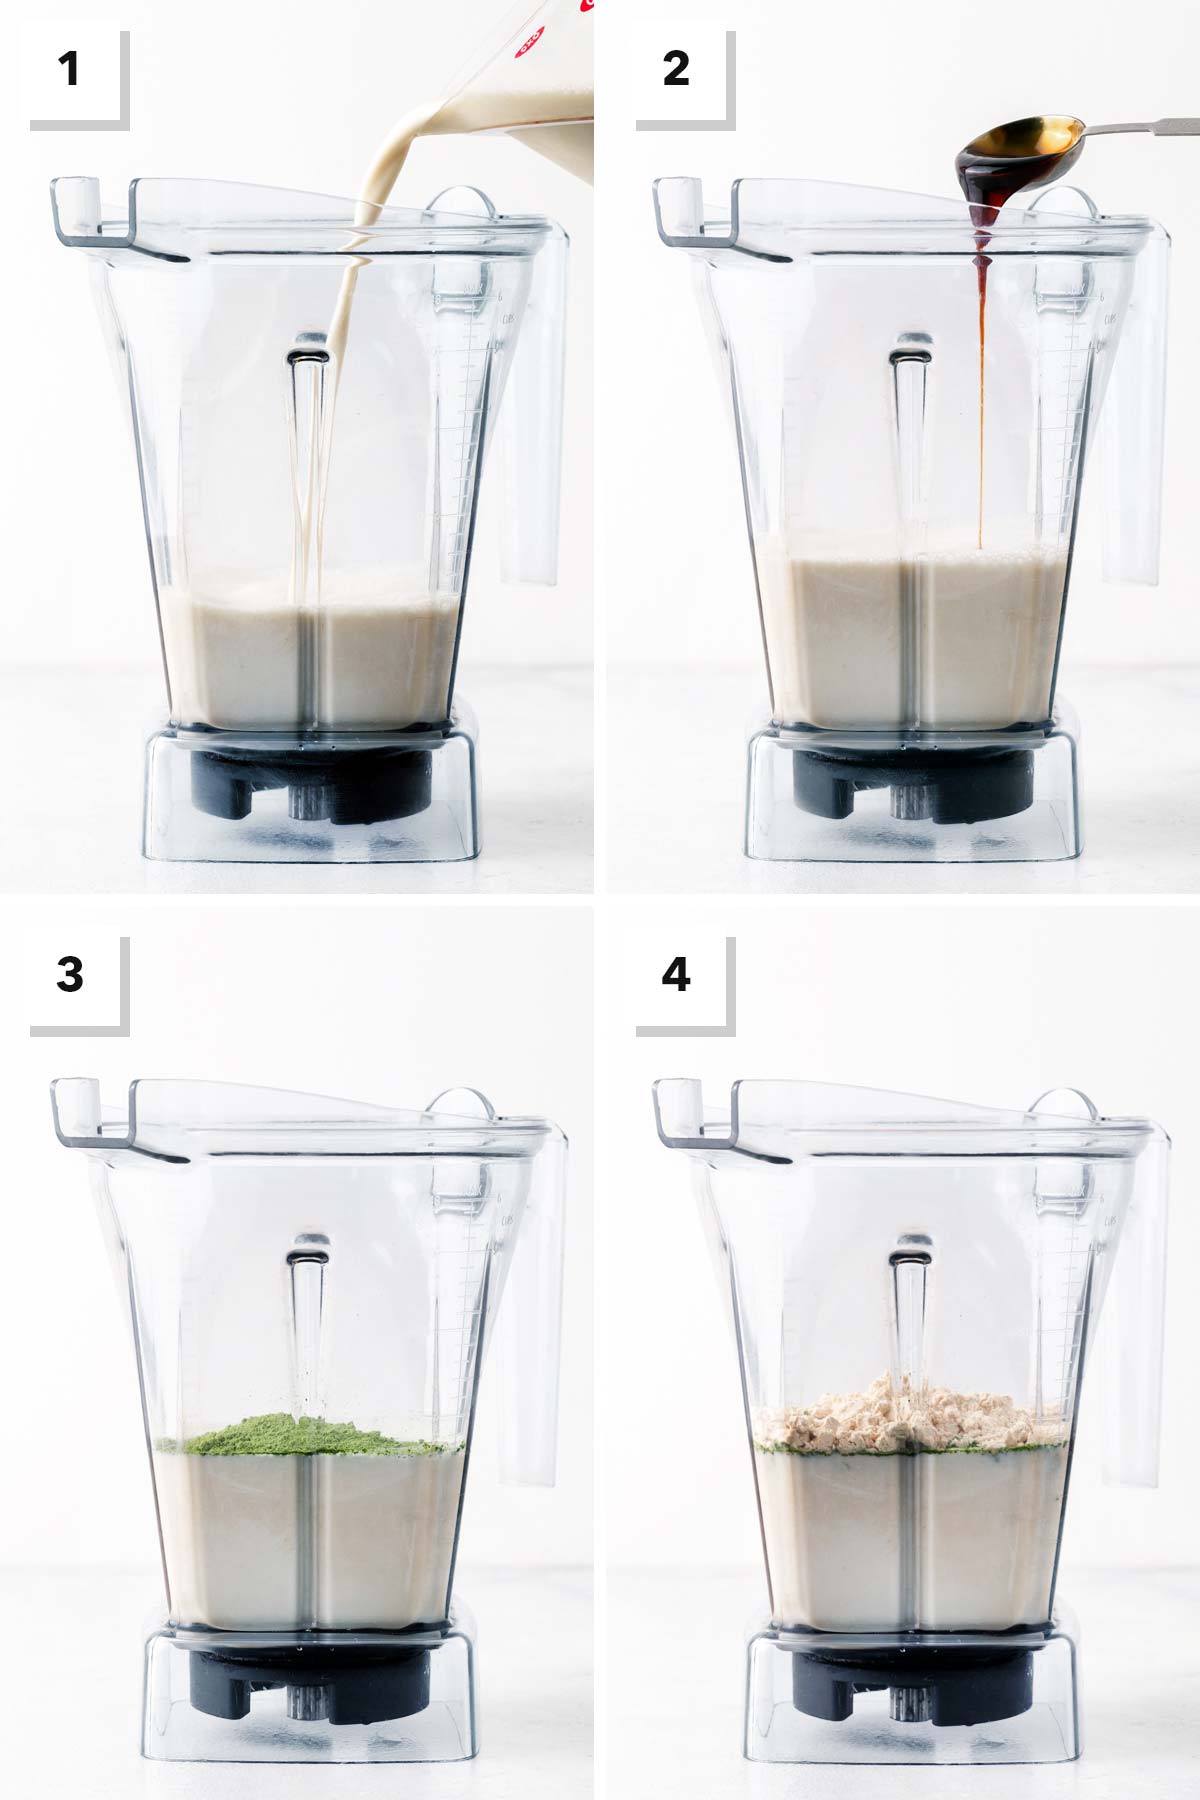 Steps for making a protein shake.